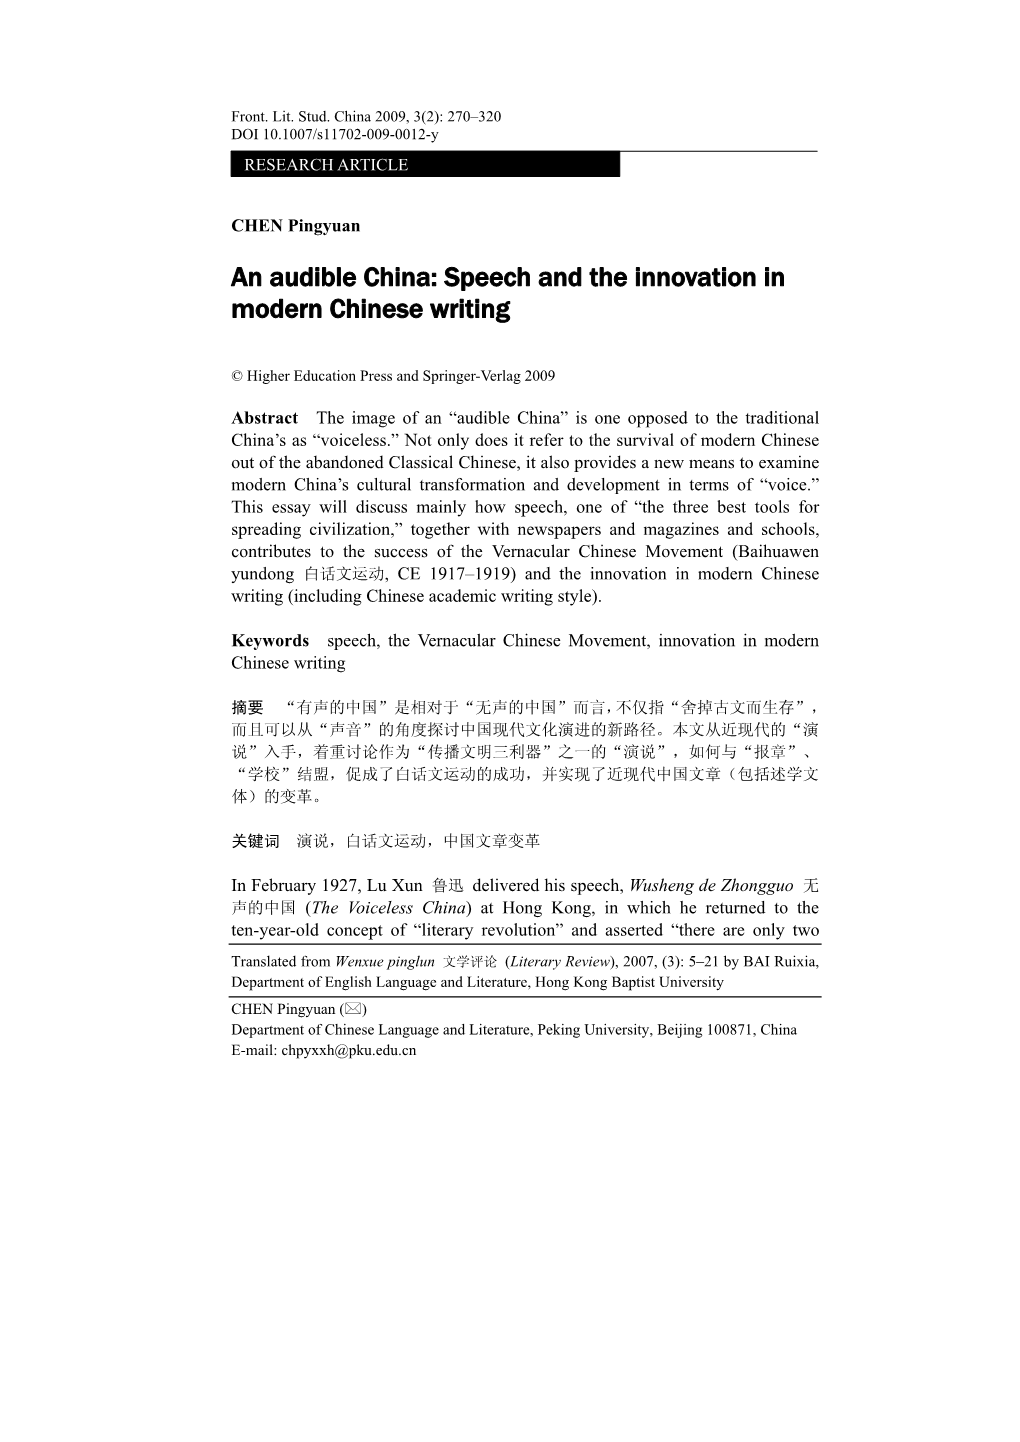 An Audible China: Speech and the Innovation in Modern Chinese Writing